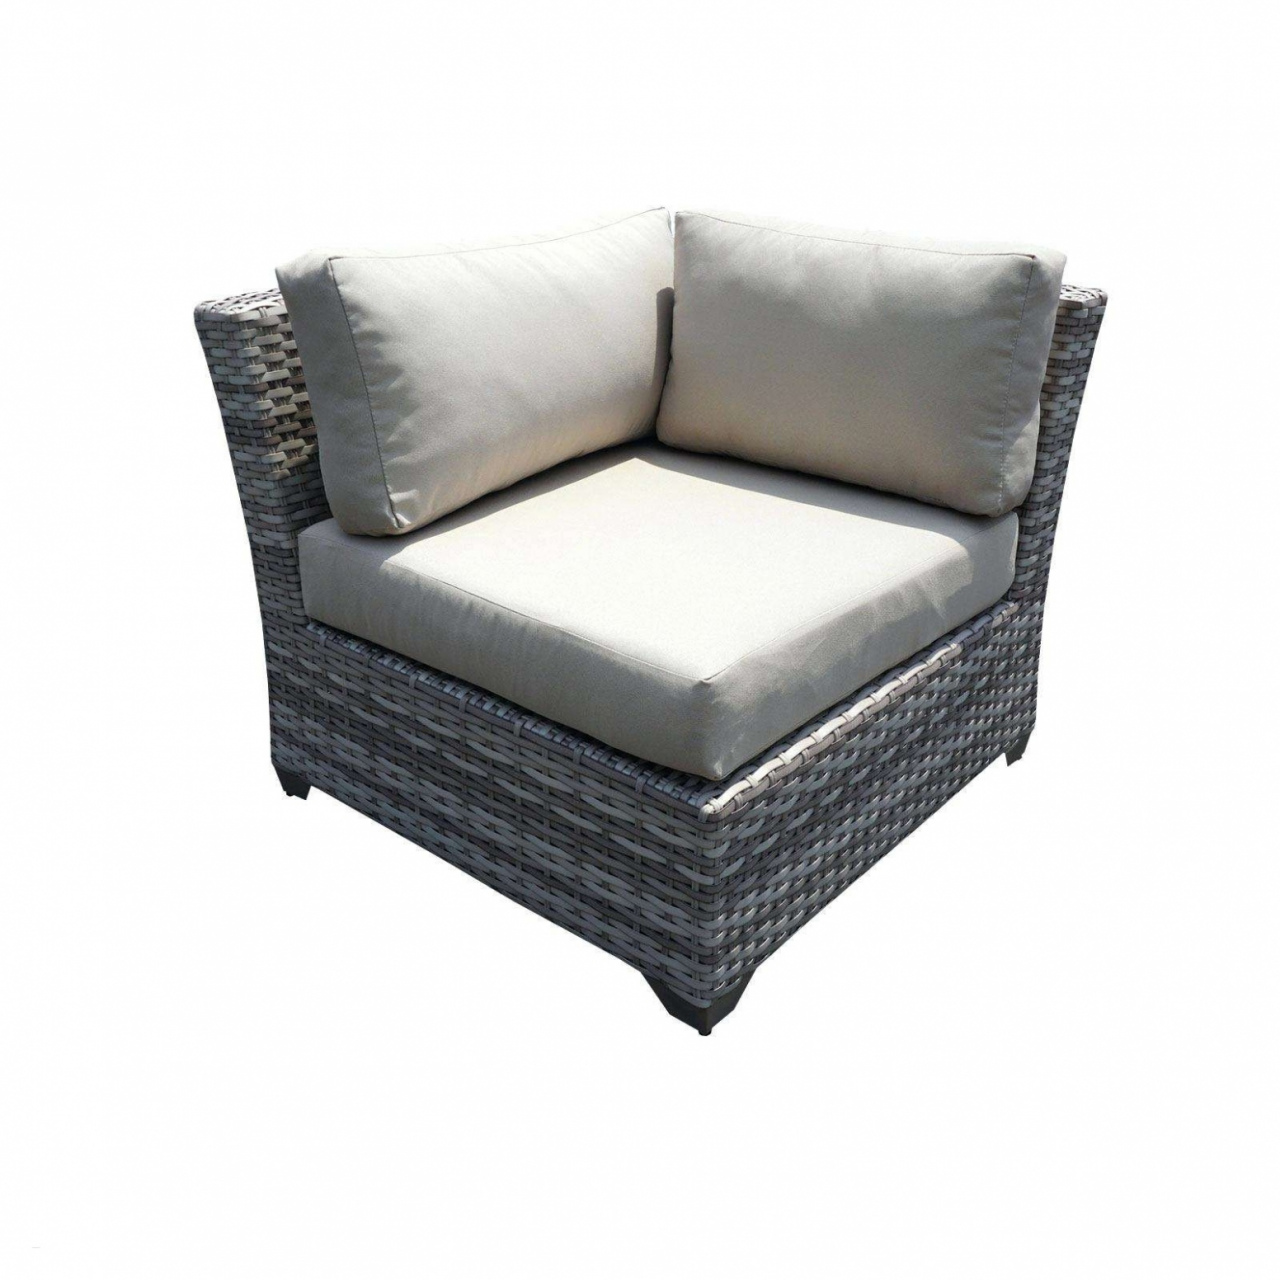 day bed sofa couch discount luxus patio furniture daybed patio daybed 0d kimya durch day bed sofa